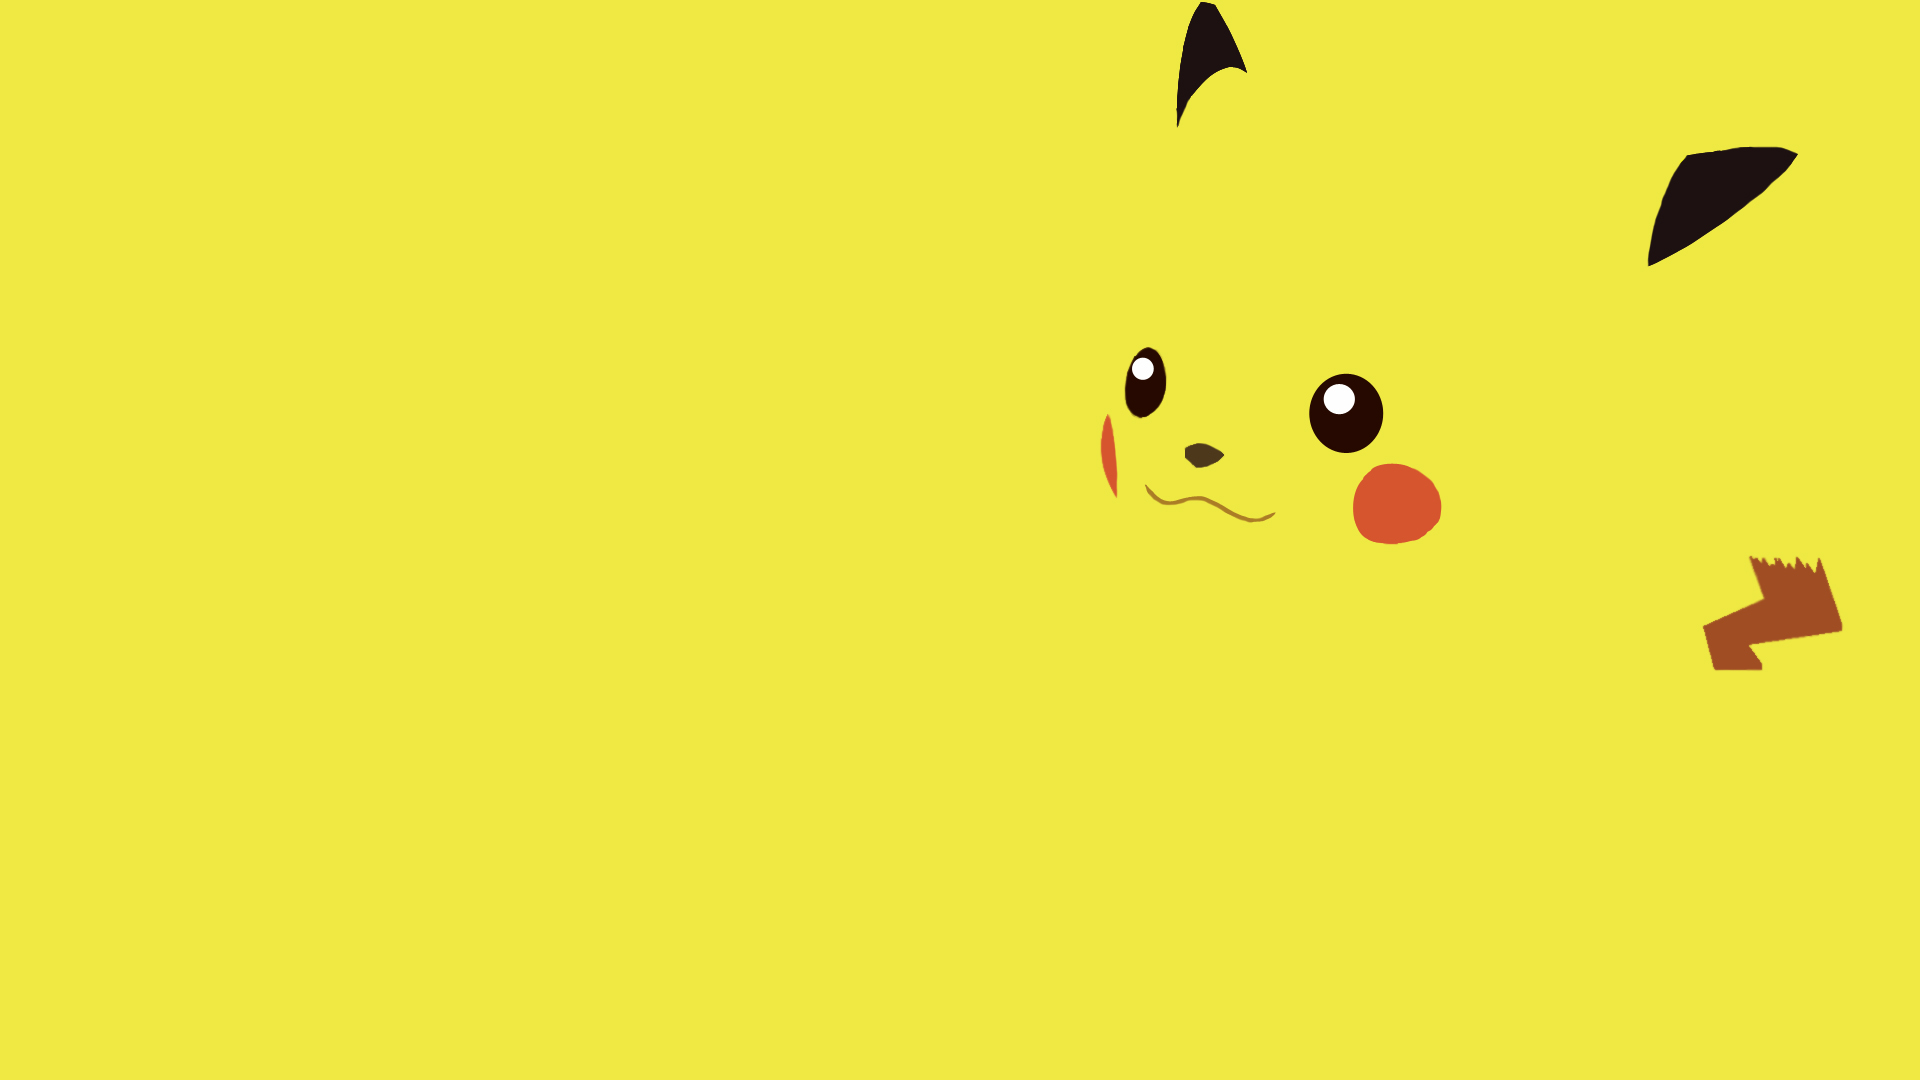 Cute Pokemon Wallpaper High Quality 1687   HD Wallpapers Site